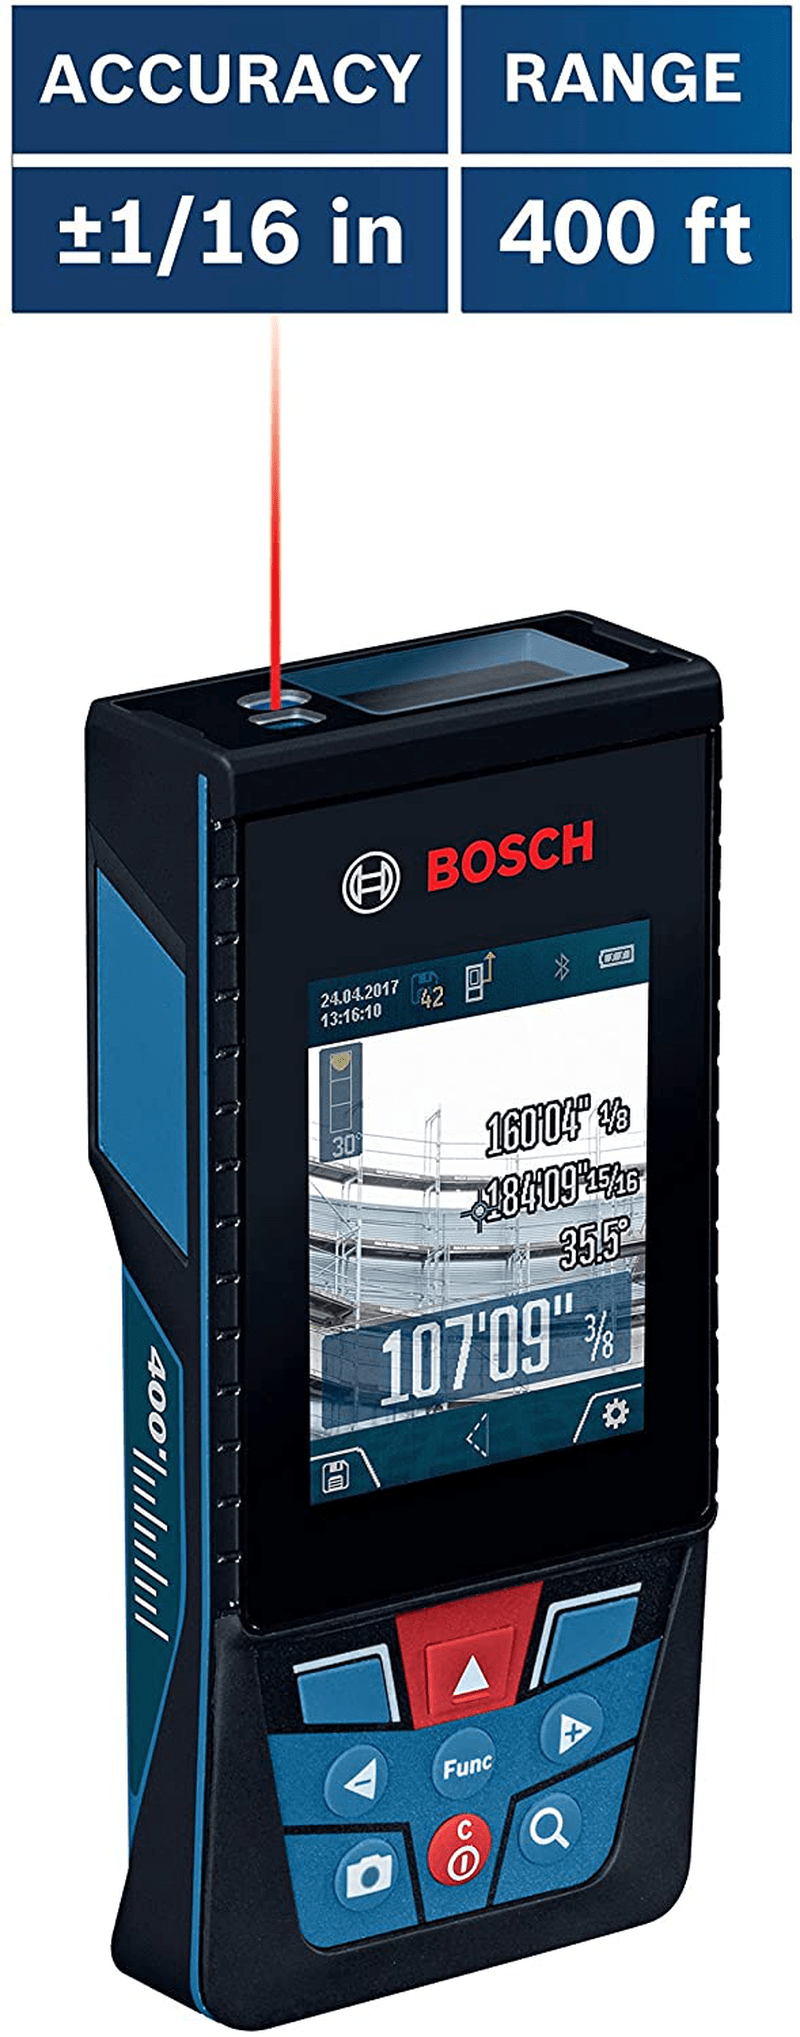 Bosch GLM400CL Blaze Outdoor 400ft Bluetooth Connected Laser Measure with Camera & Lithium-Ion Battery Hardware > Tools > Measuring Tools & Sensors BOSCH   